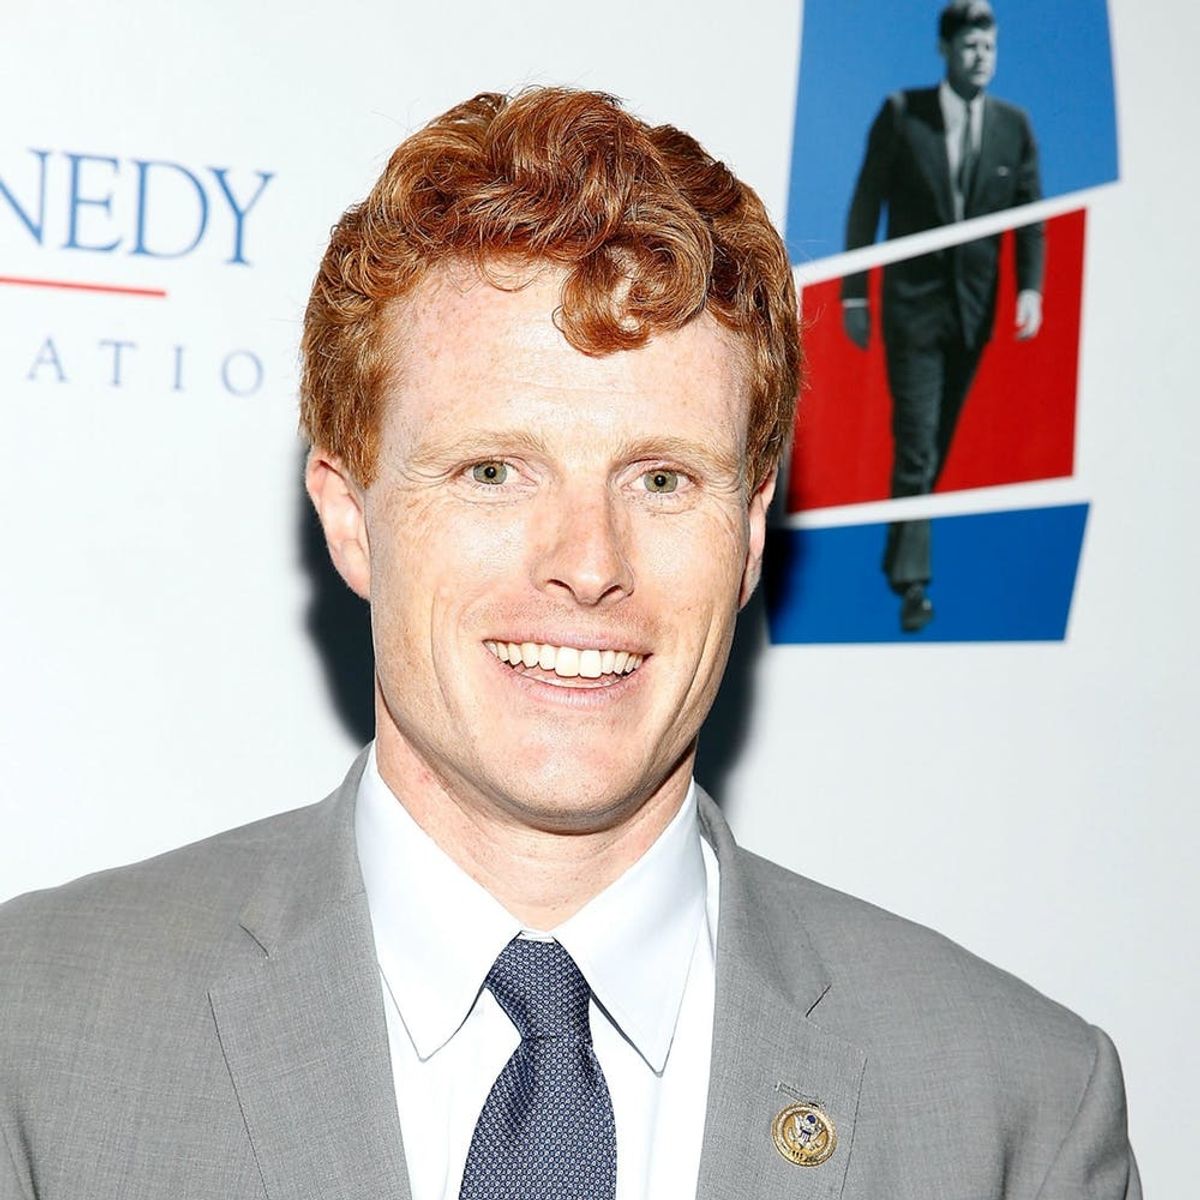 Rep. Joe Kennedy III’s SOTU Rebuttal Was Partly in Spanish and People are Shook